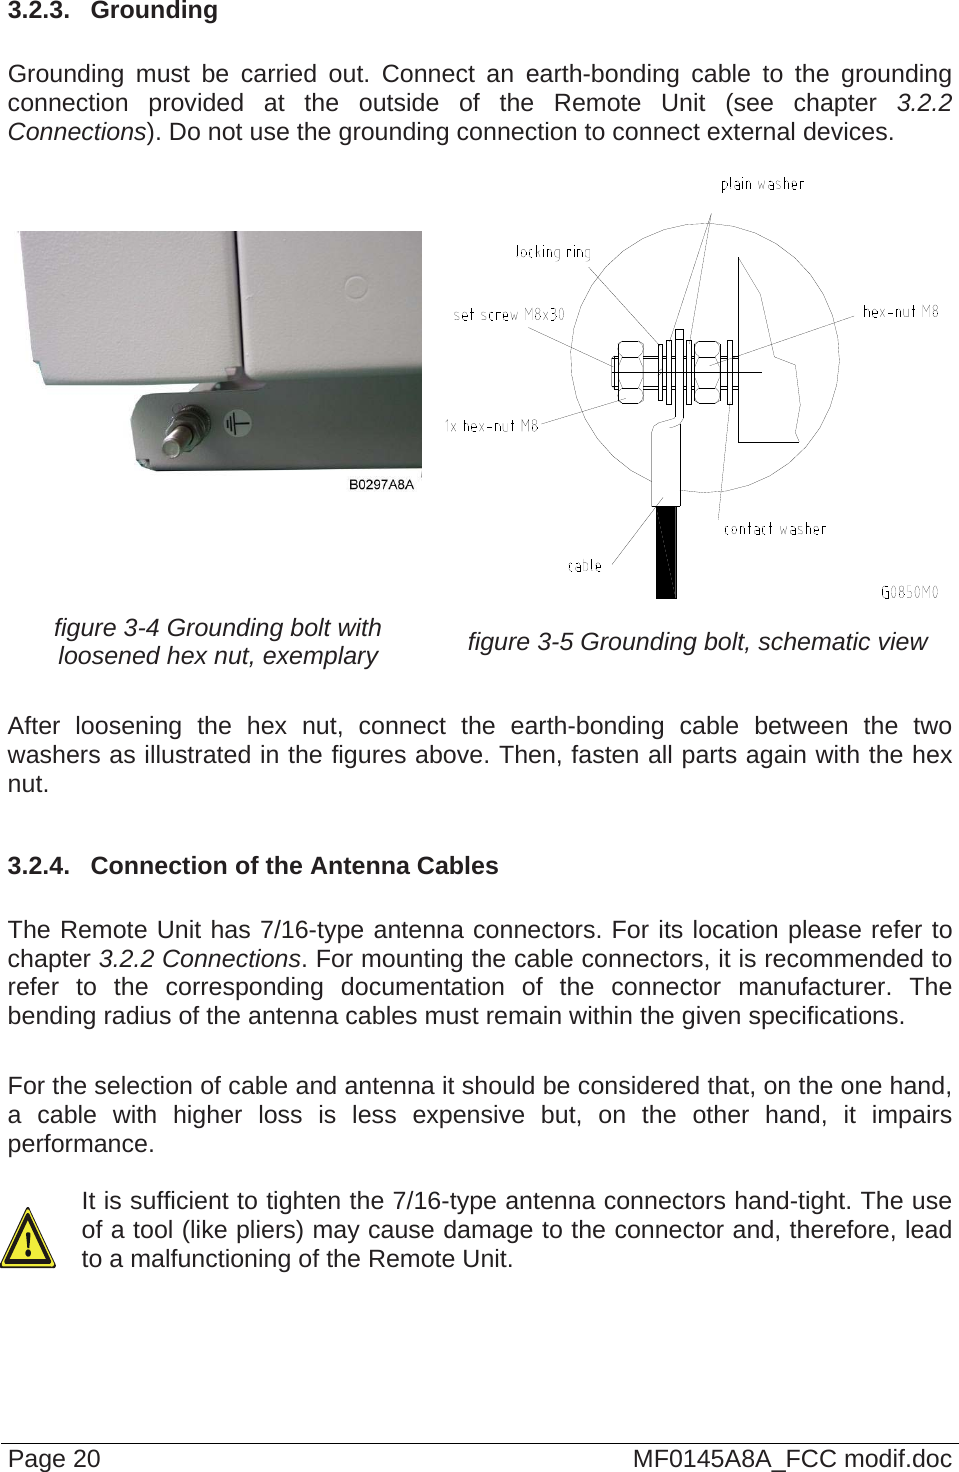  3.2.3.  Grounding  Grounding must be carried out. Connect an earth-bonding cable to the grounding connection provided at the outside of the Remote Unit (see chapter 3.2.2 Connections). Do not use the grounding connection to connect external devices.      figure 3-4 Grounding bolt with loosened hex nut, exemplary  figure 3-5 Grounding bolt, schematic view  After loosening the hex nut, connect the earth-bonding cable between the two washers as illustrated in the figures above. Then, fasten all parts again with the hex nut.  3.2.4.  Connection of the Antenna Cables  The Remote Unit has 7/16-type antenna connectors. For its location please refer to chapter 3.2.2 Connections. For mounting the cable connectors, it is recommended to refer to the corresponding documentation of the connector manufacturer. The bending radius of the antenna cables must remain within the given specifications.  For the selection of cable and antenna it should be considered that, on the one hand, a cable with higher loss is less expensive but, on the other hand, it impairs performance.   It is sufficient to tighten the 7/16-type antenna connectors hand-tight. The use of a tool (like pliers) may cause damage to the connector and, therefore, lead to a malfunctioning of the Remote Unit.   Page 20  MF0145A8A_FCC modif.doc 